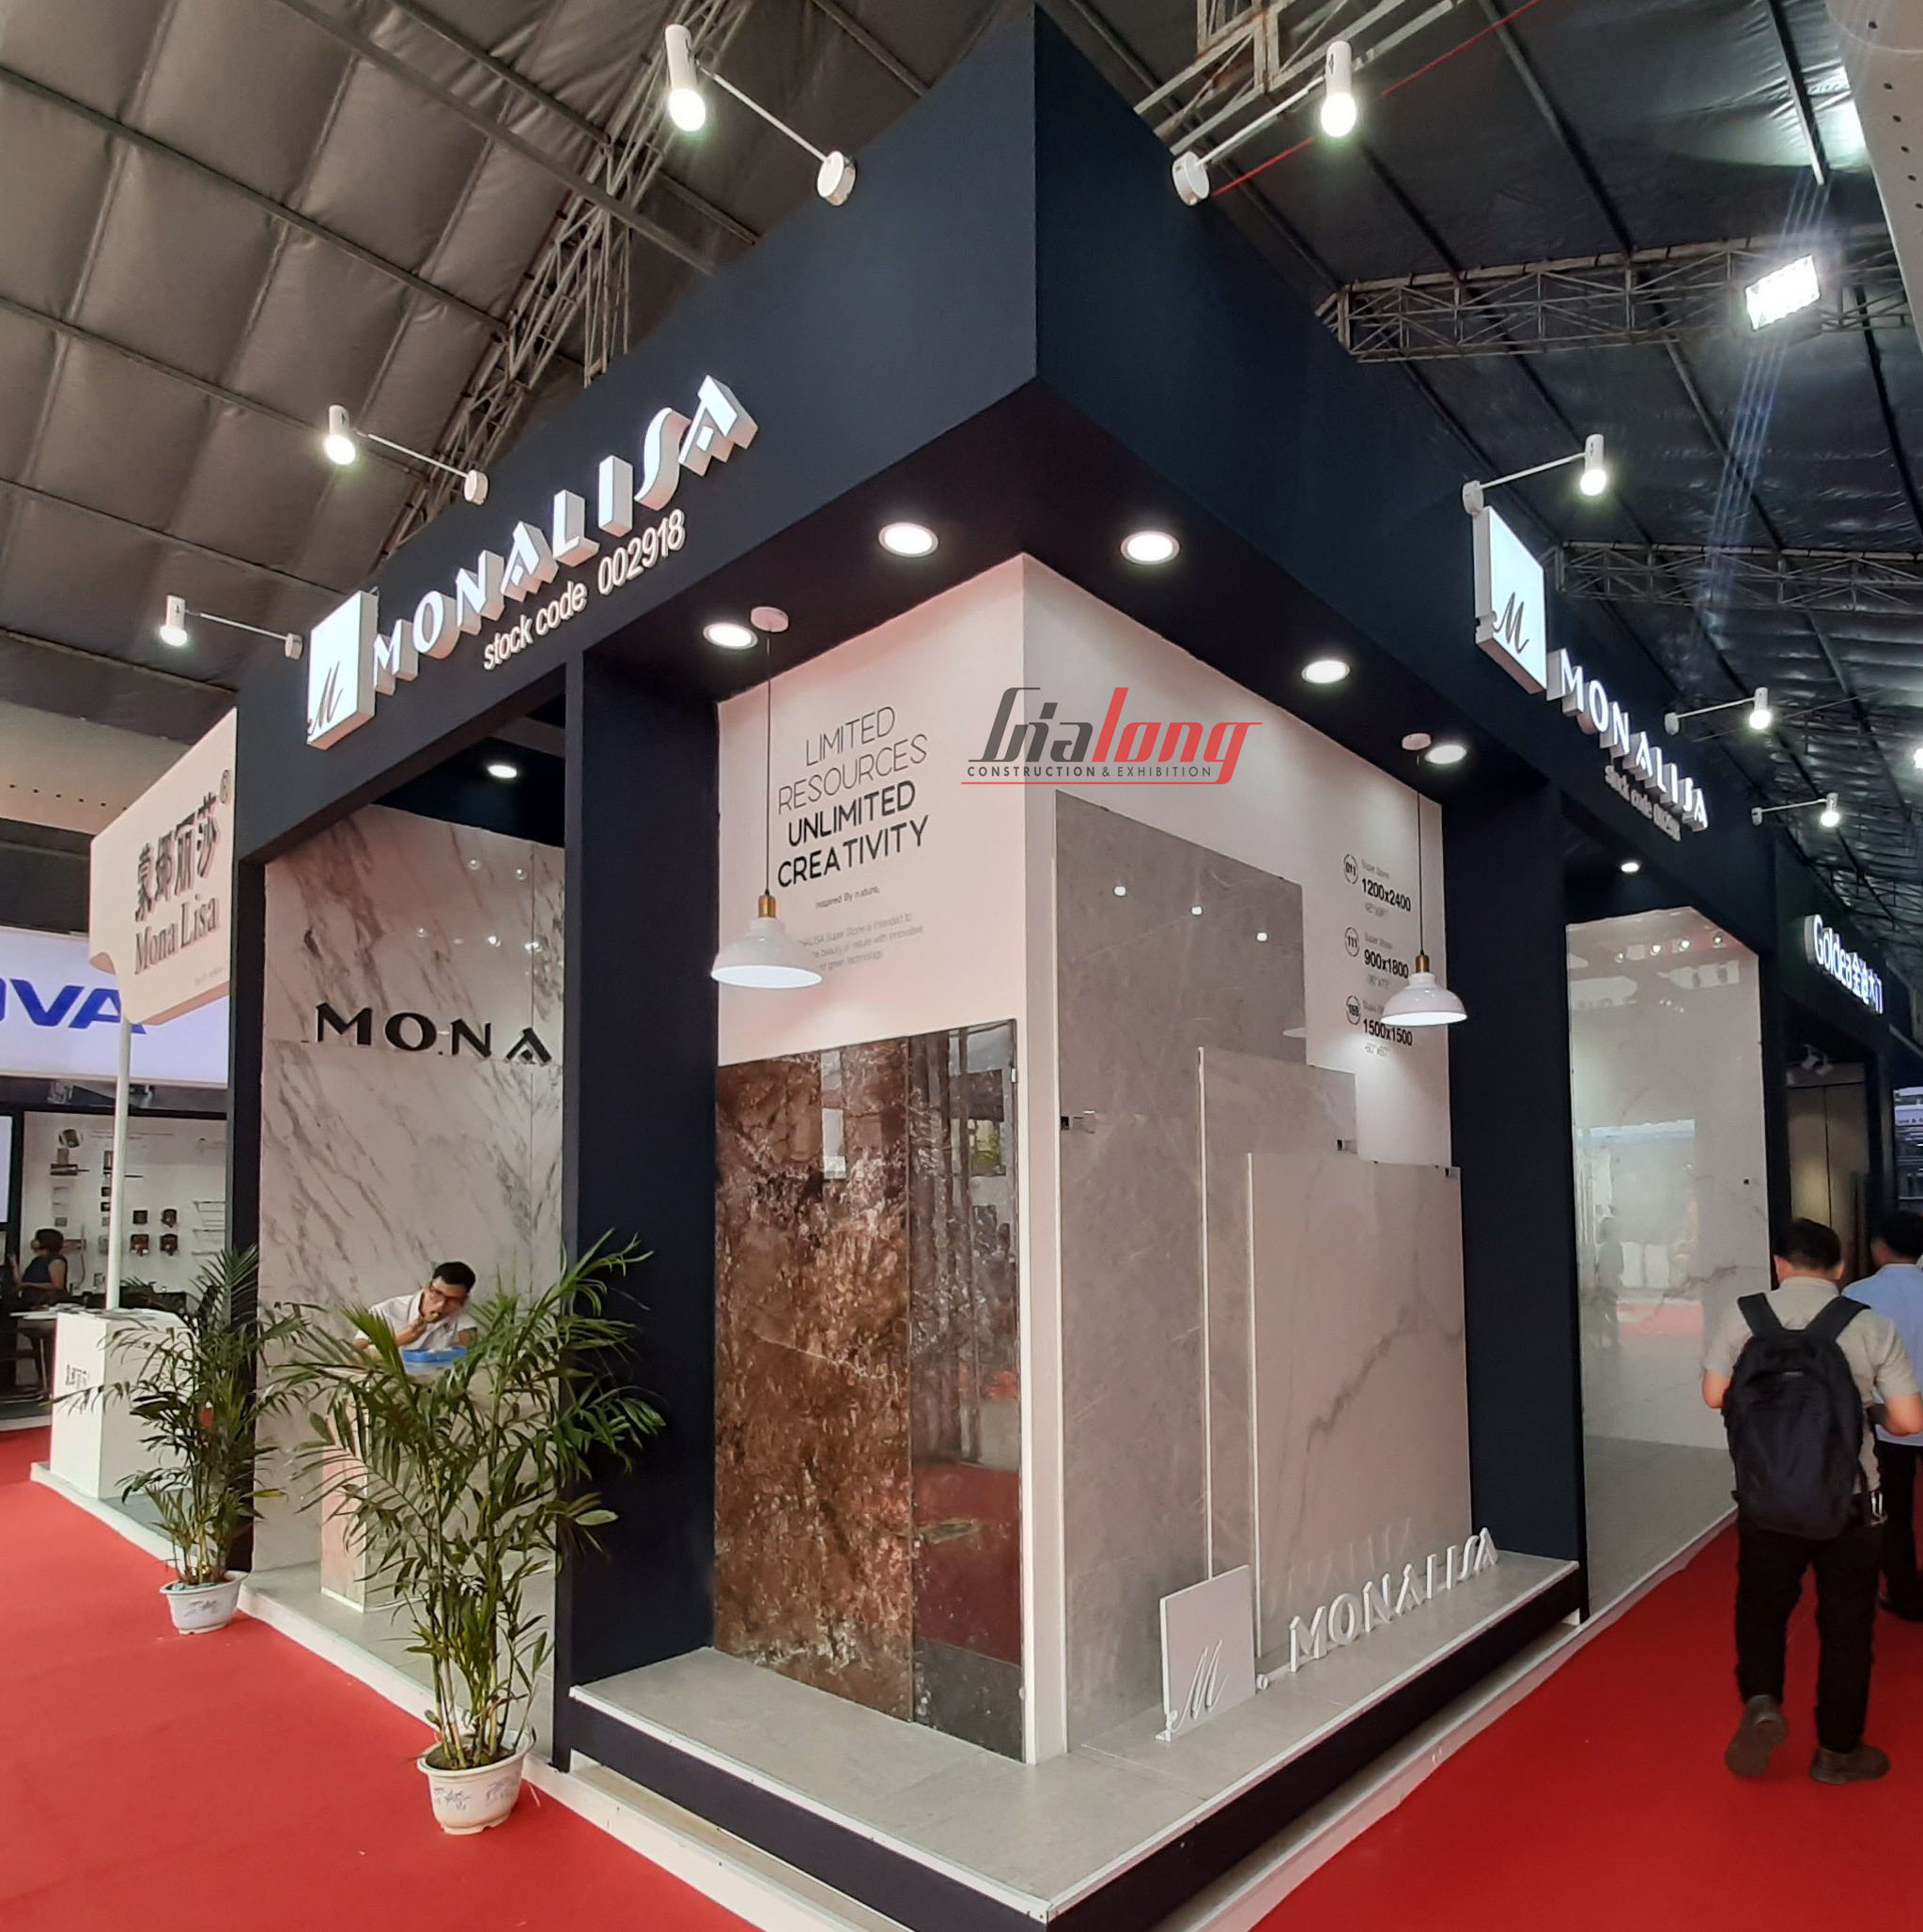 The Monalisa exhibition stand was constructed by Gia Long